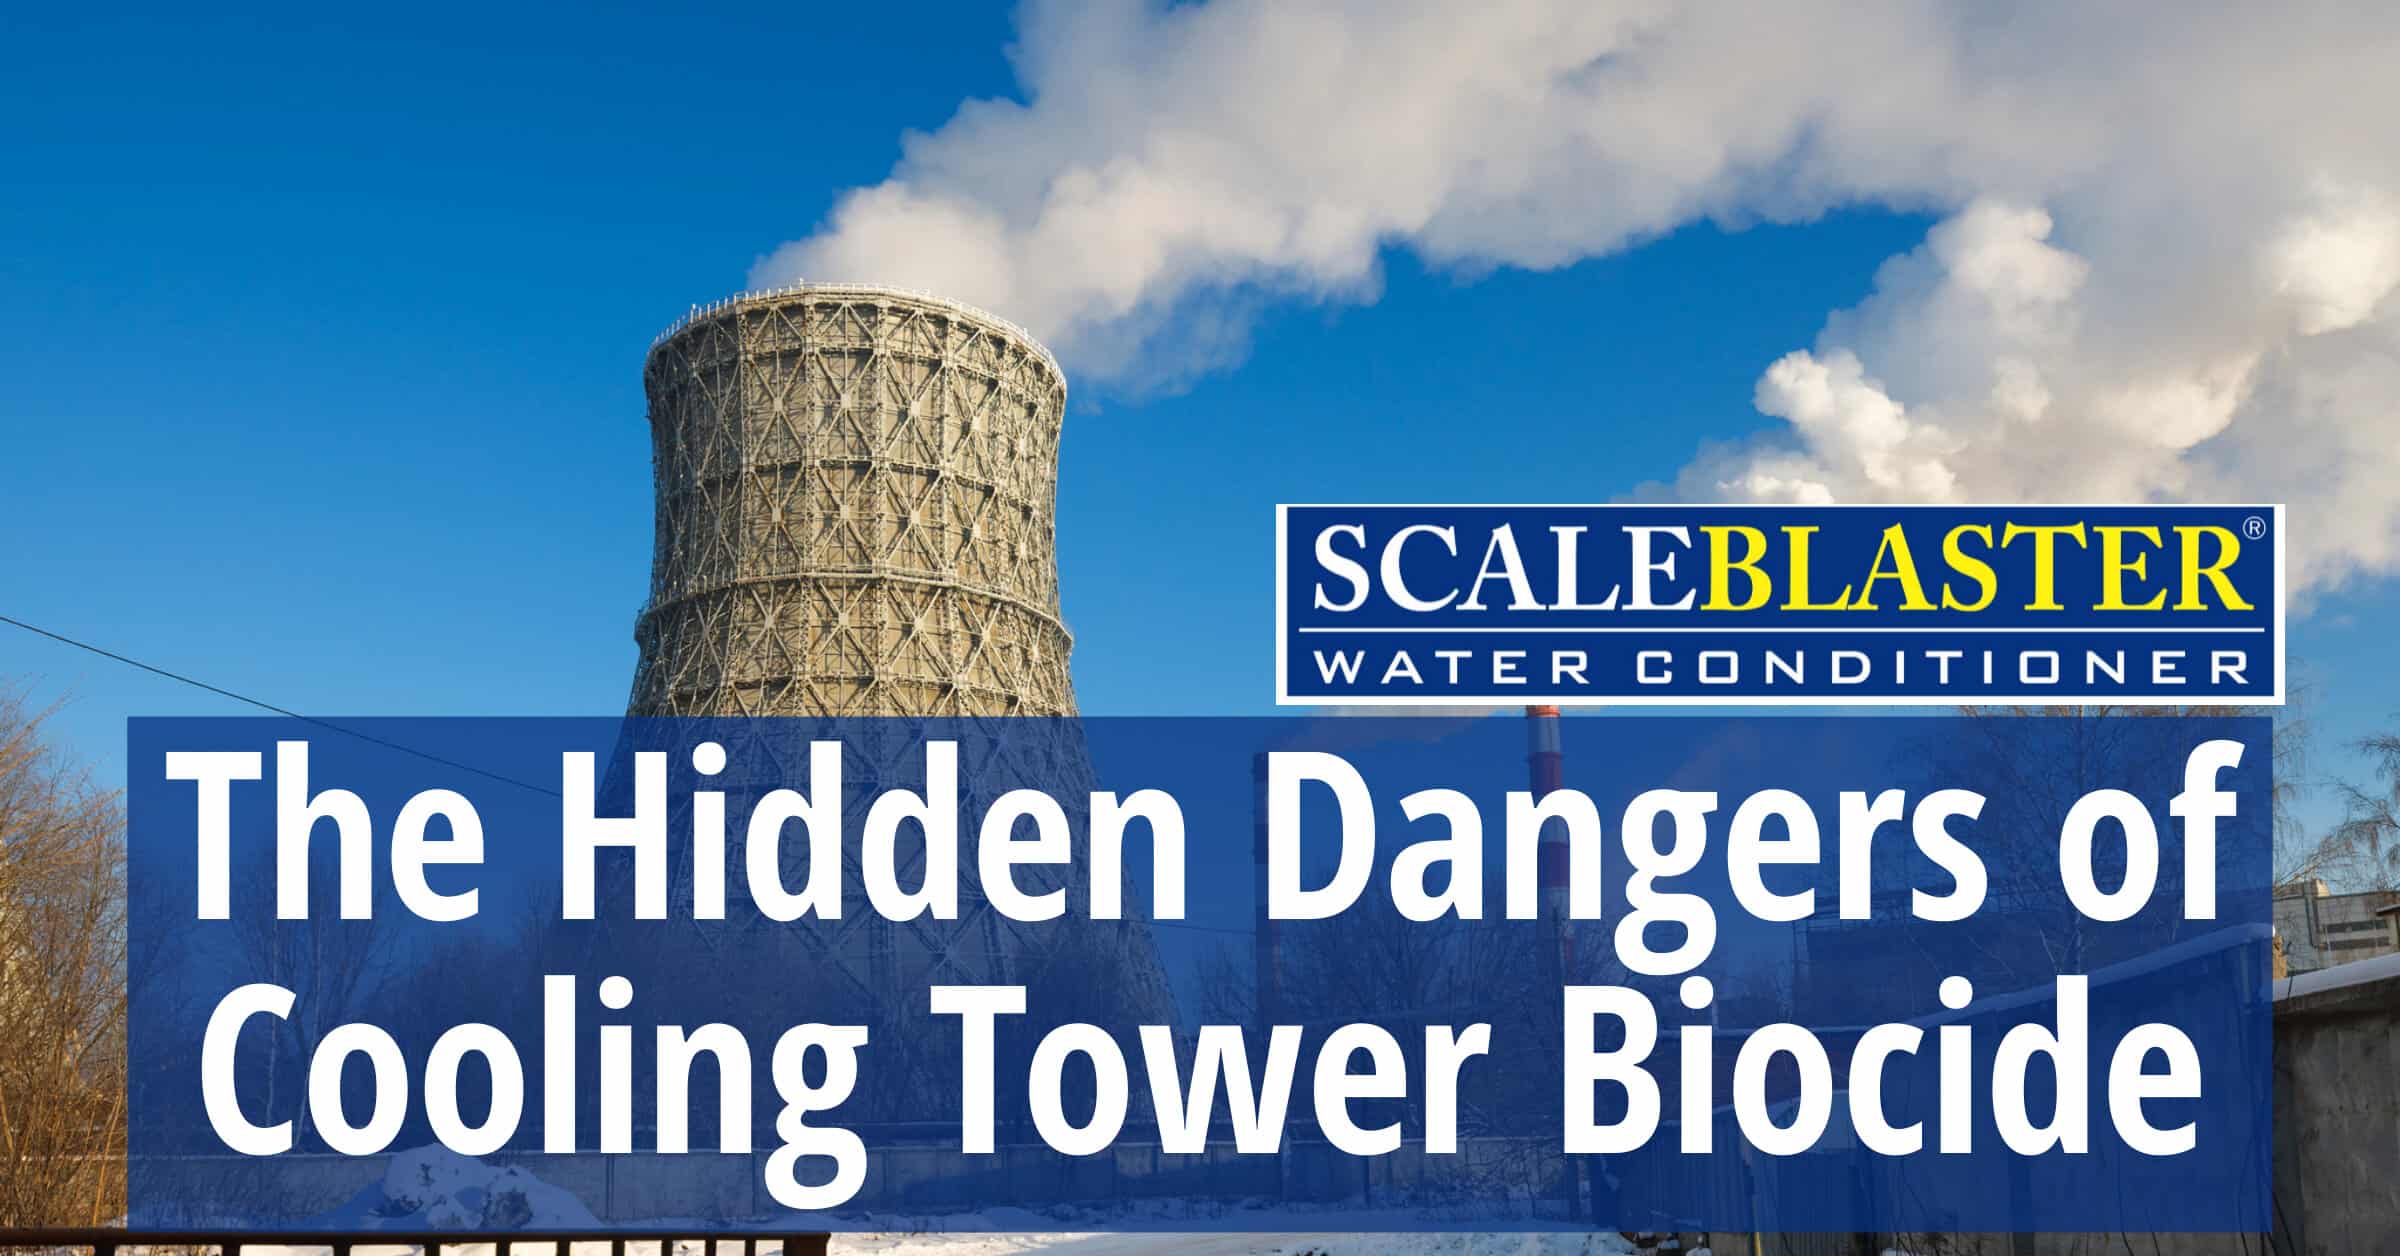 The Hidden Dangers of Cooling Tower Biocide